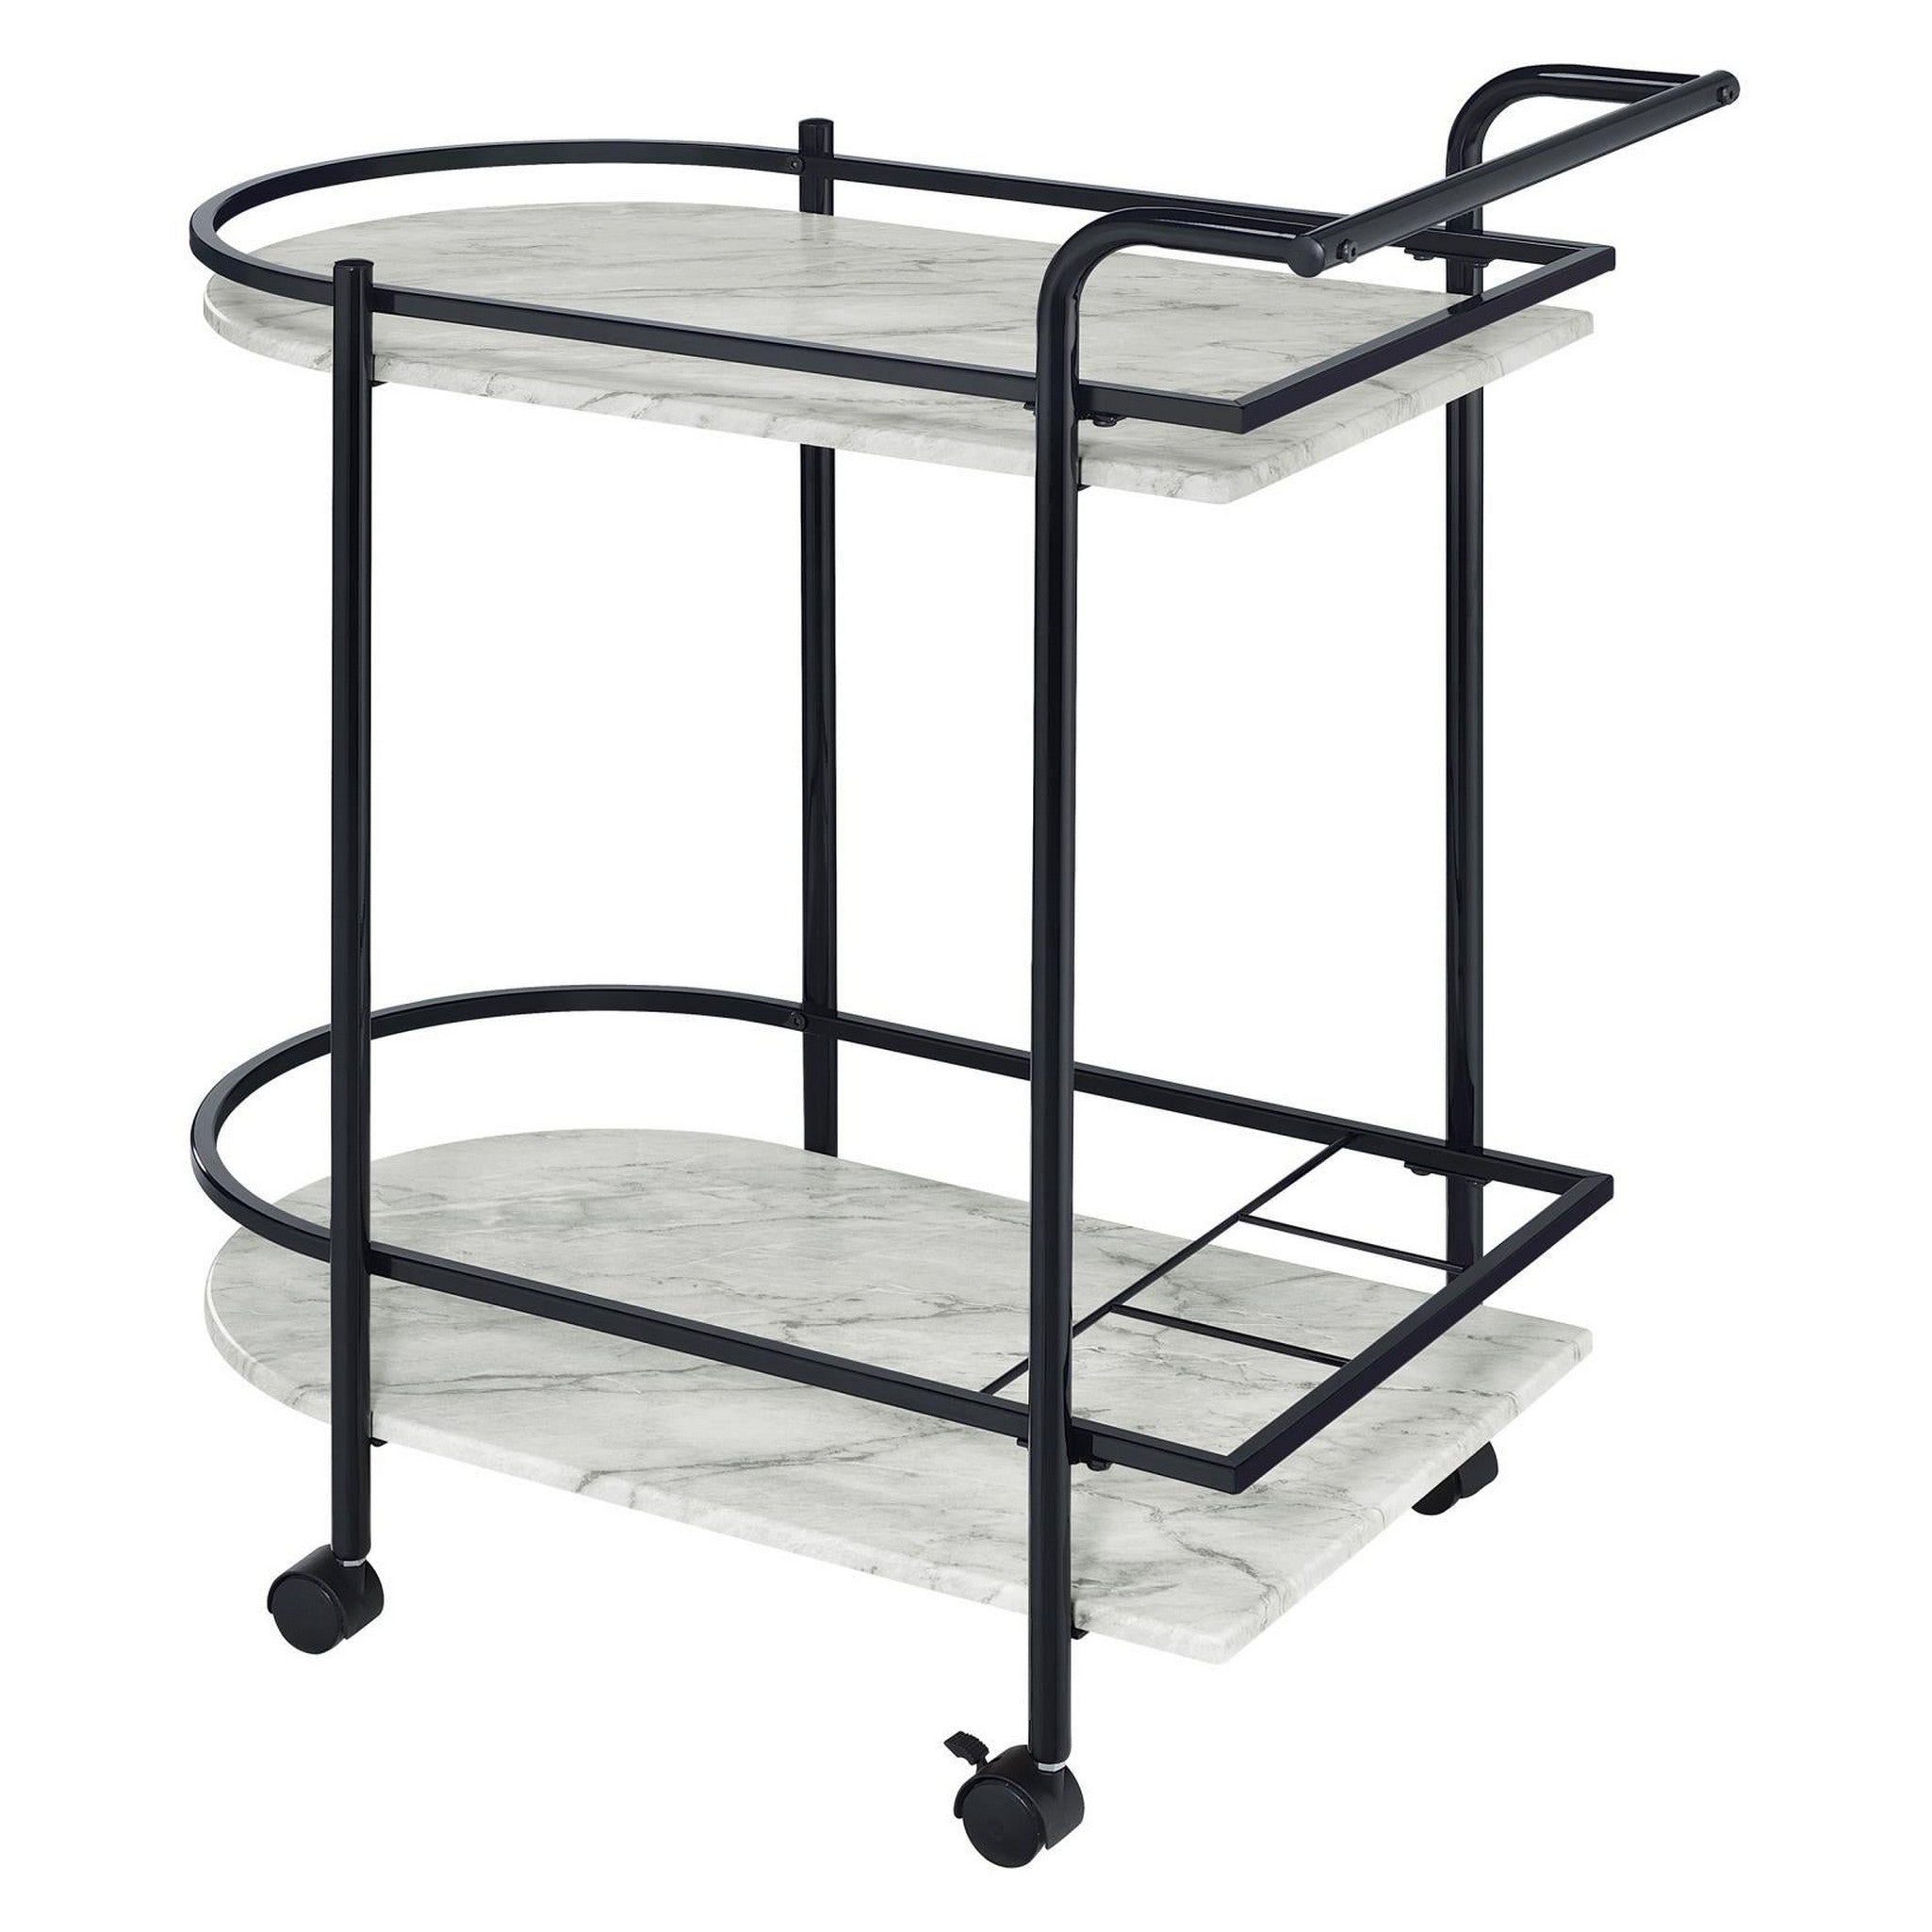 Desiree Rack Bar Cart with Casters Black 181376